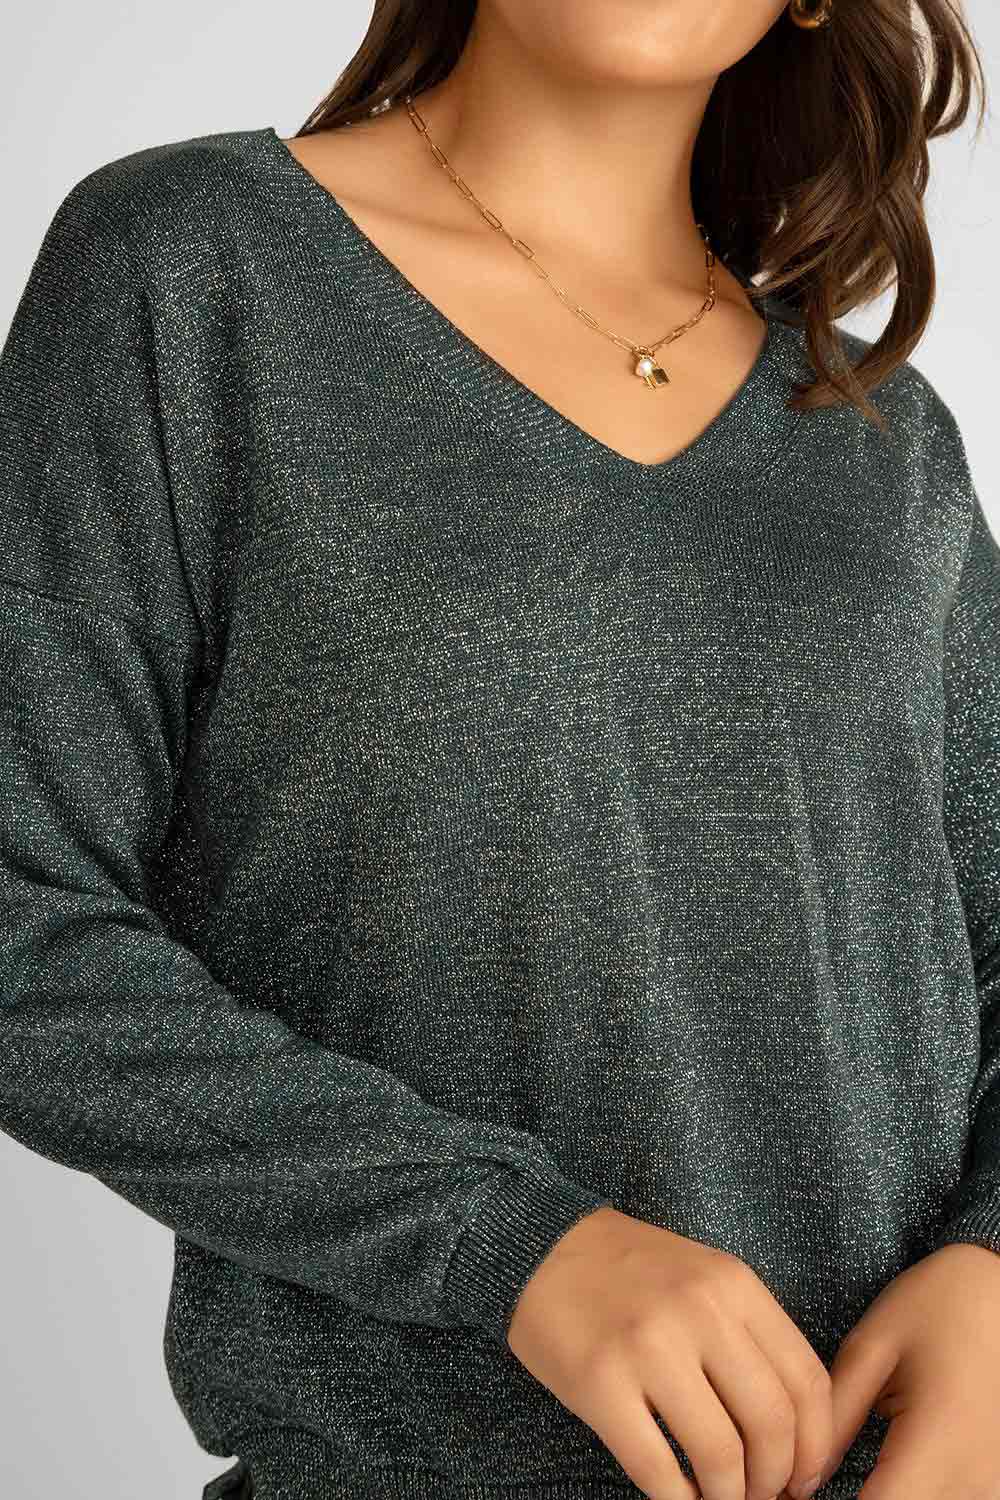 Women's Clothing ELISSIA (SL804) Lurex V-Neck Sweater in TEAL